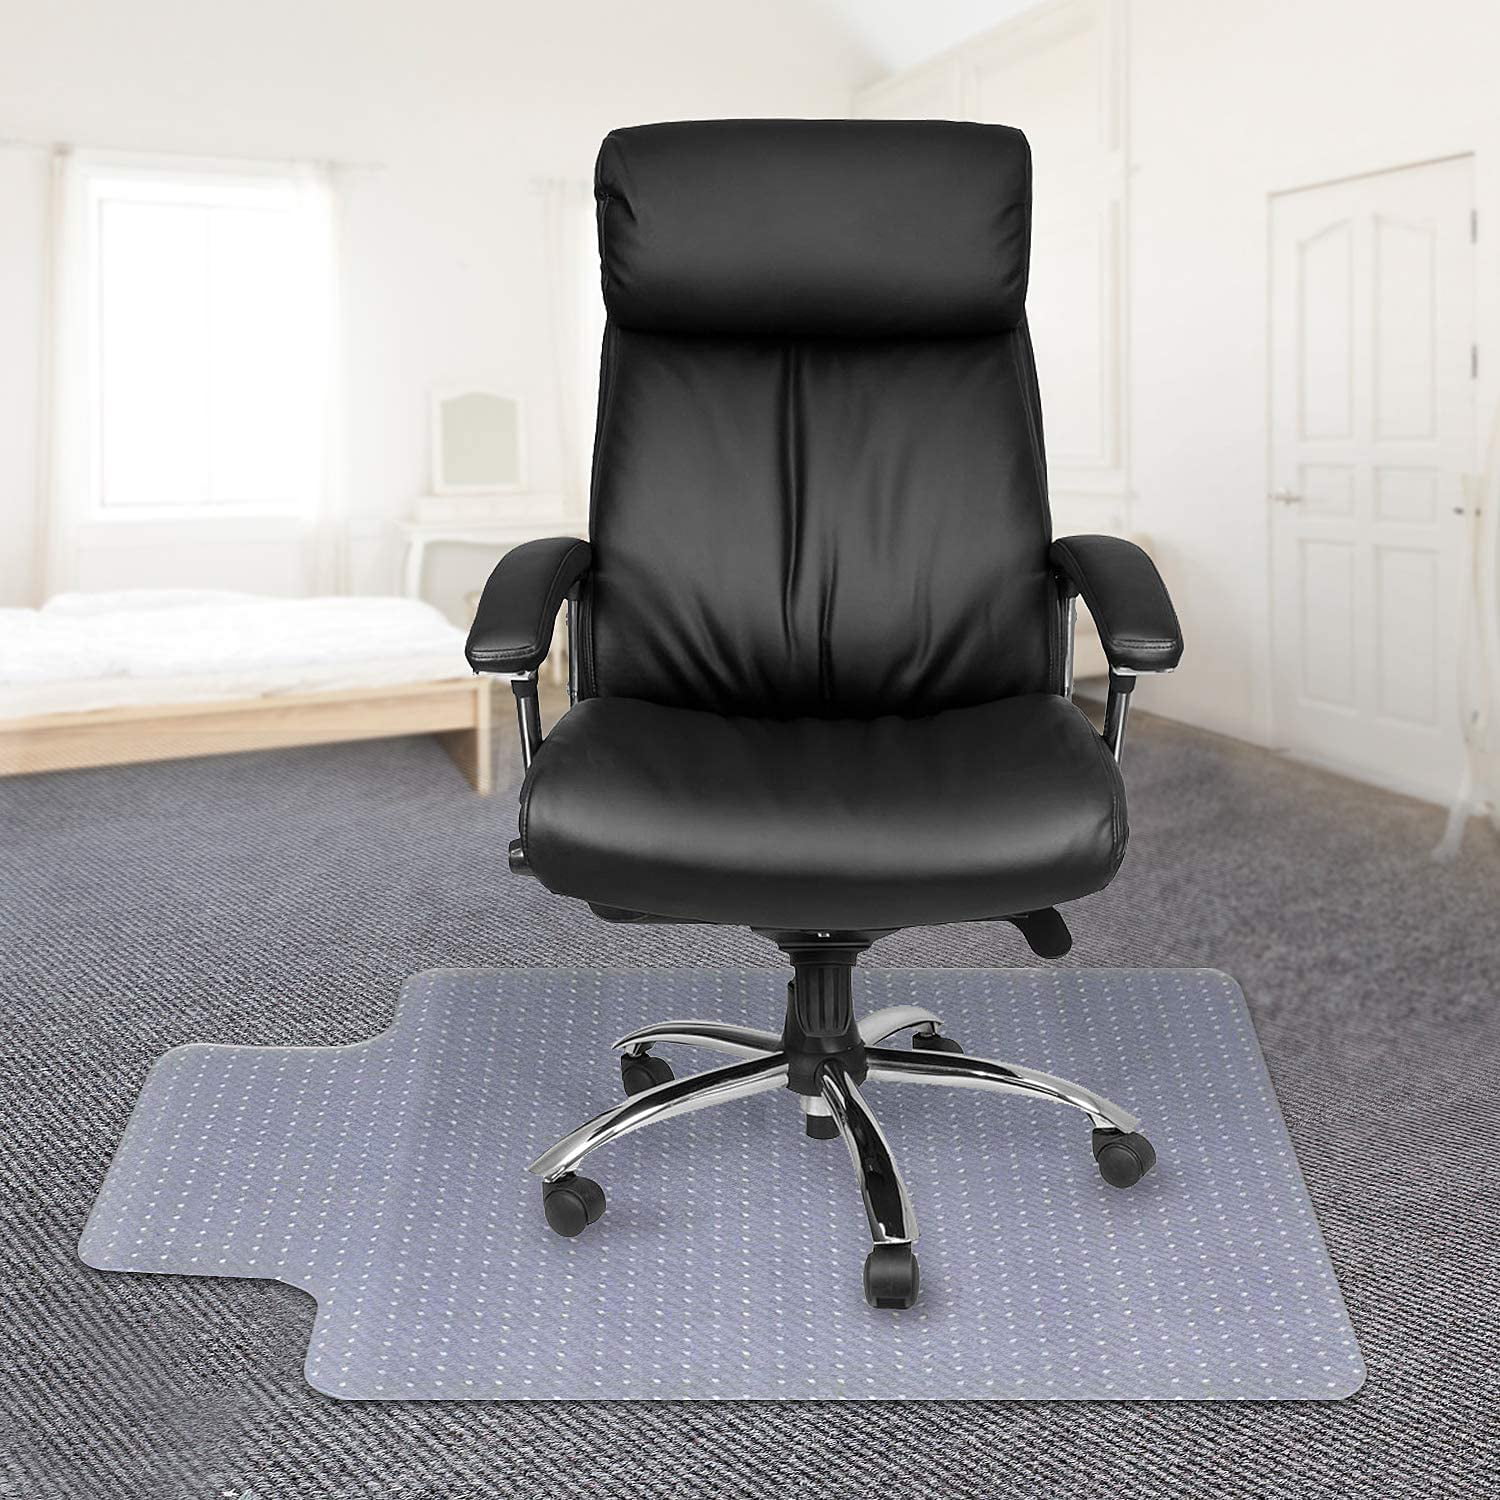 Chair Mat for Carpeted Floor, 48x36, Easy Glide Transparent Mats for